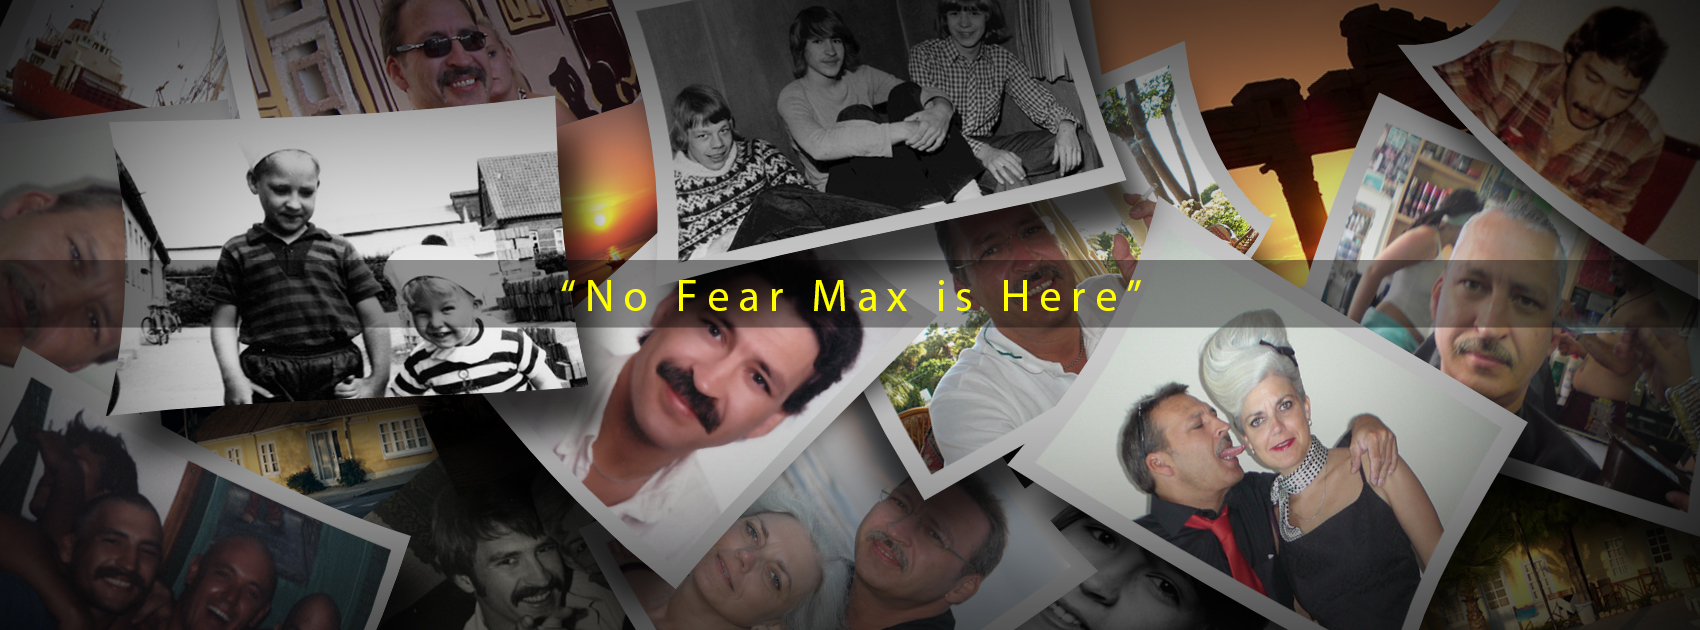 No Fear Max is Here